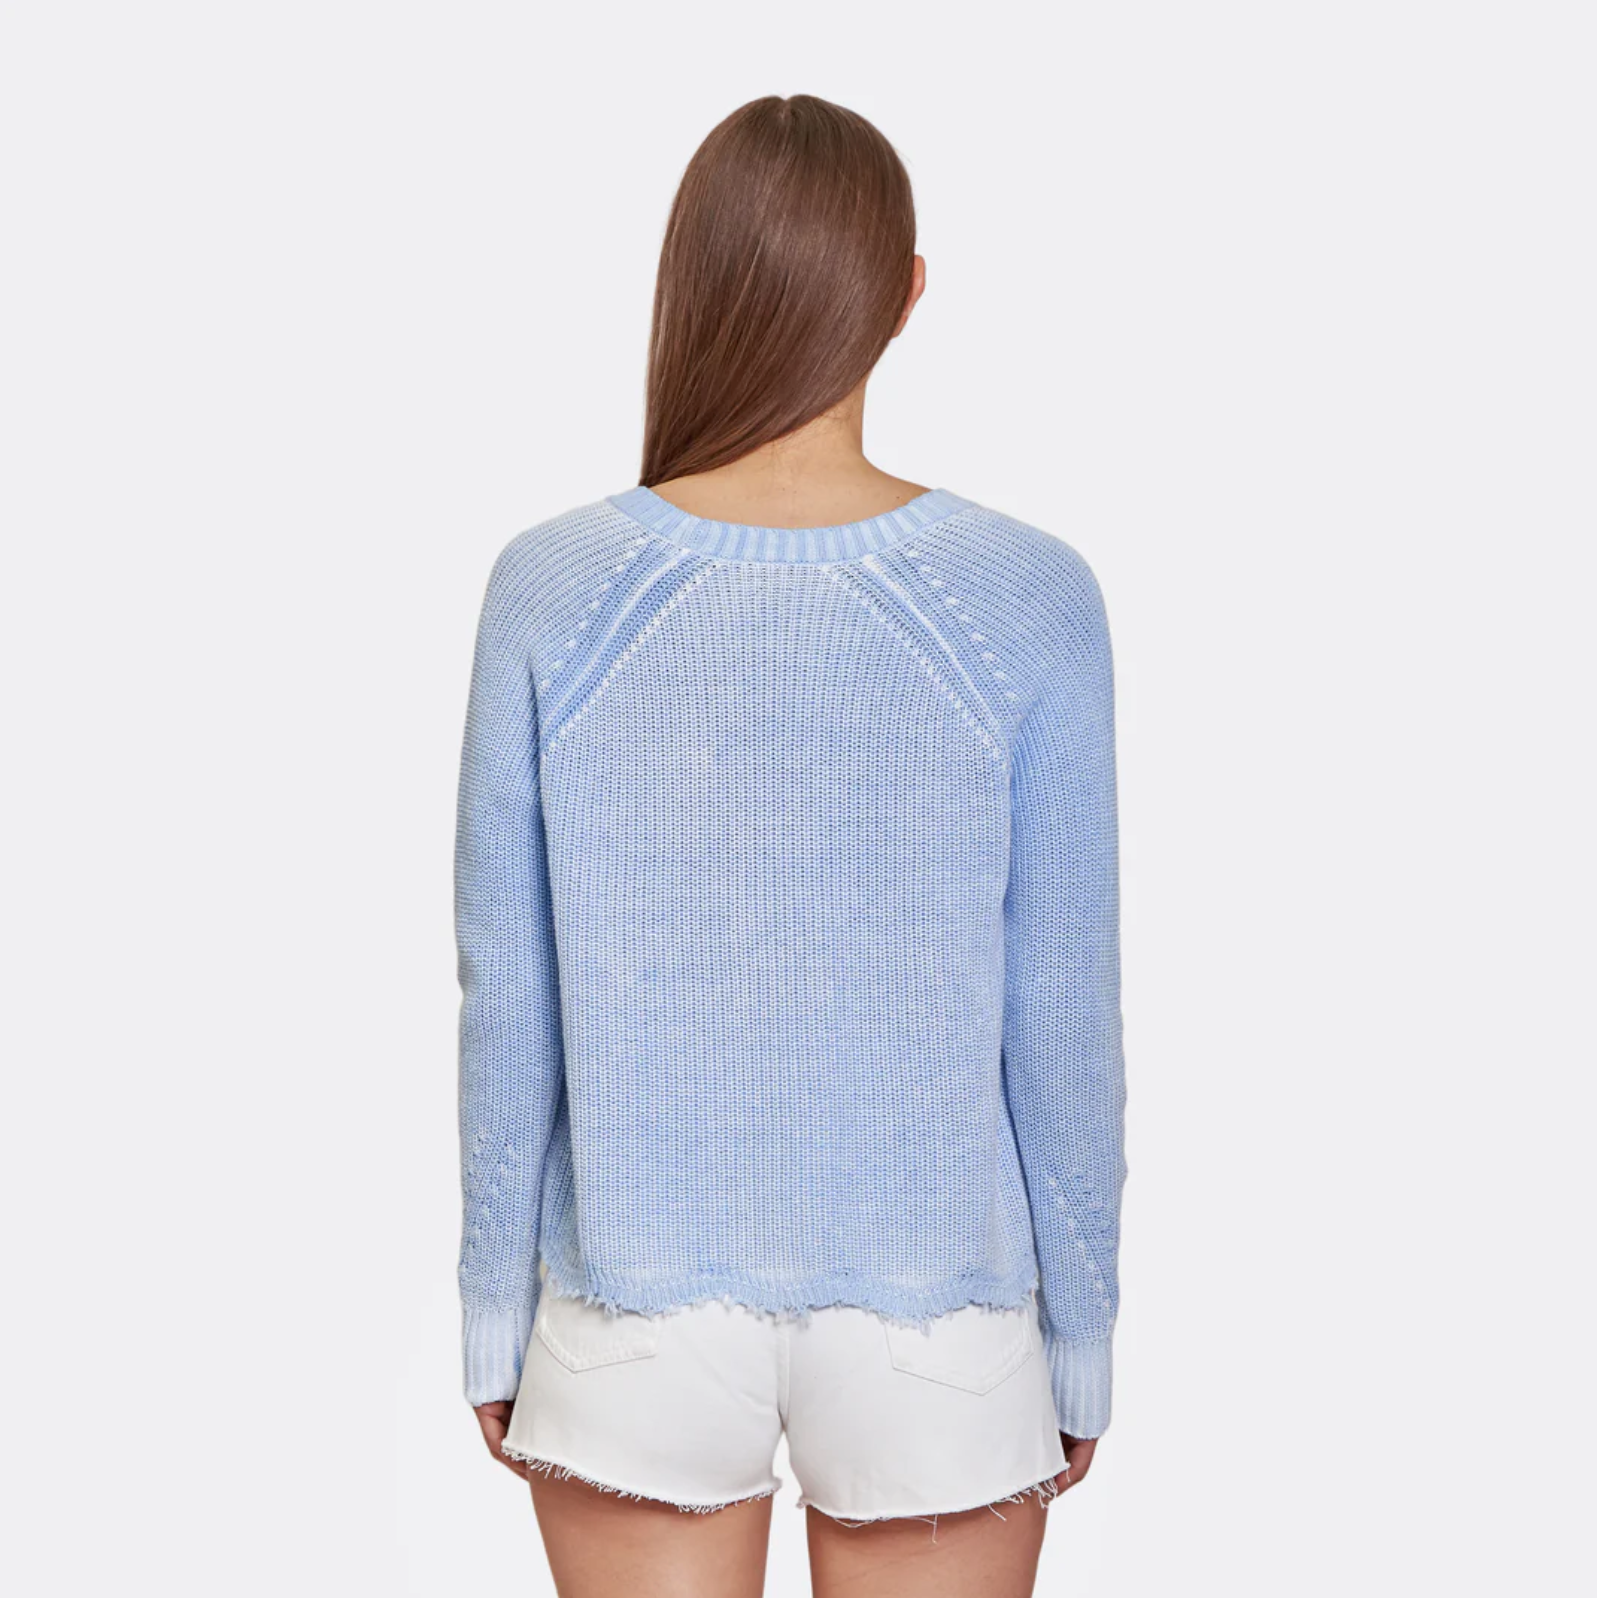 DISTRESSED INKED SCALLOP SHAKER V NECK SWEATER